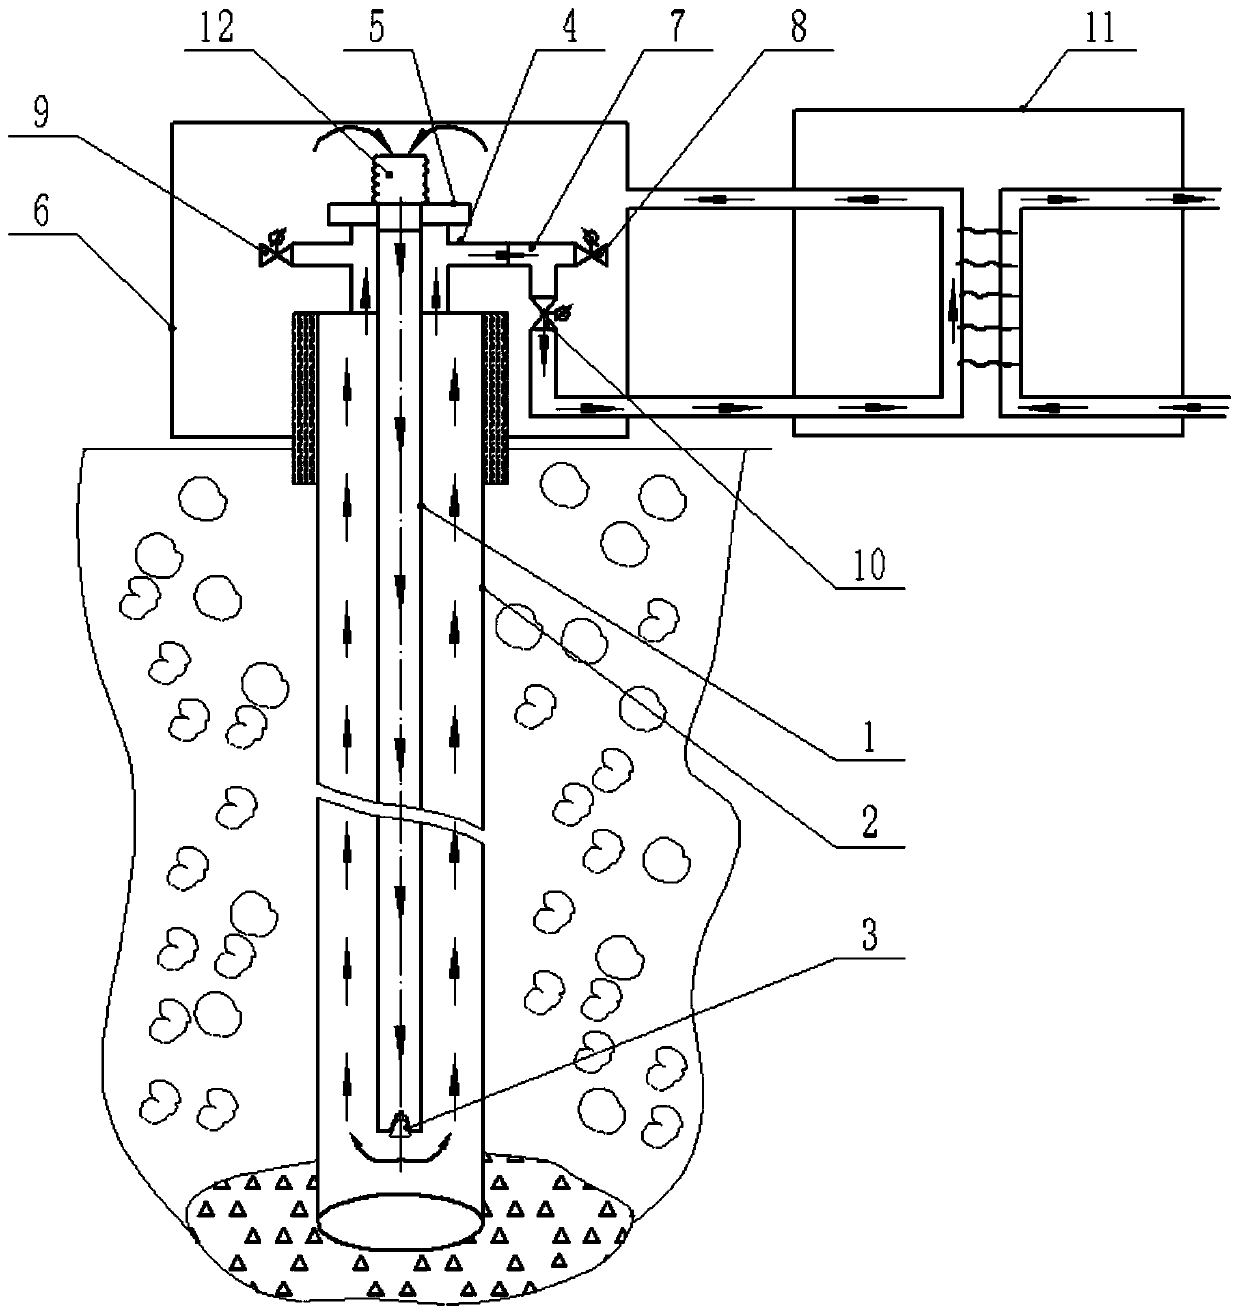 Geothermal heat extraction device